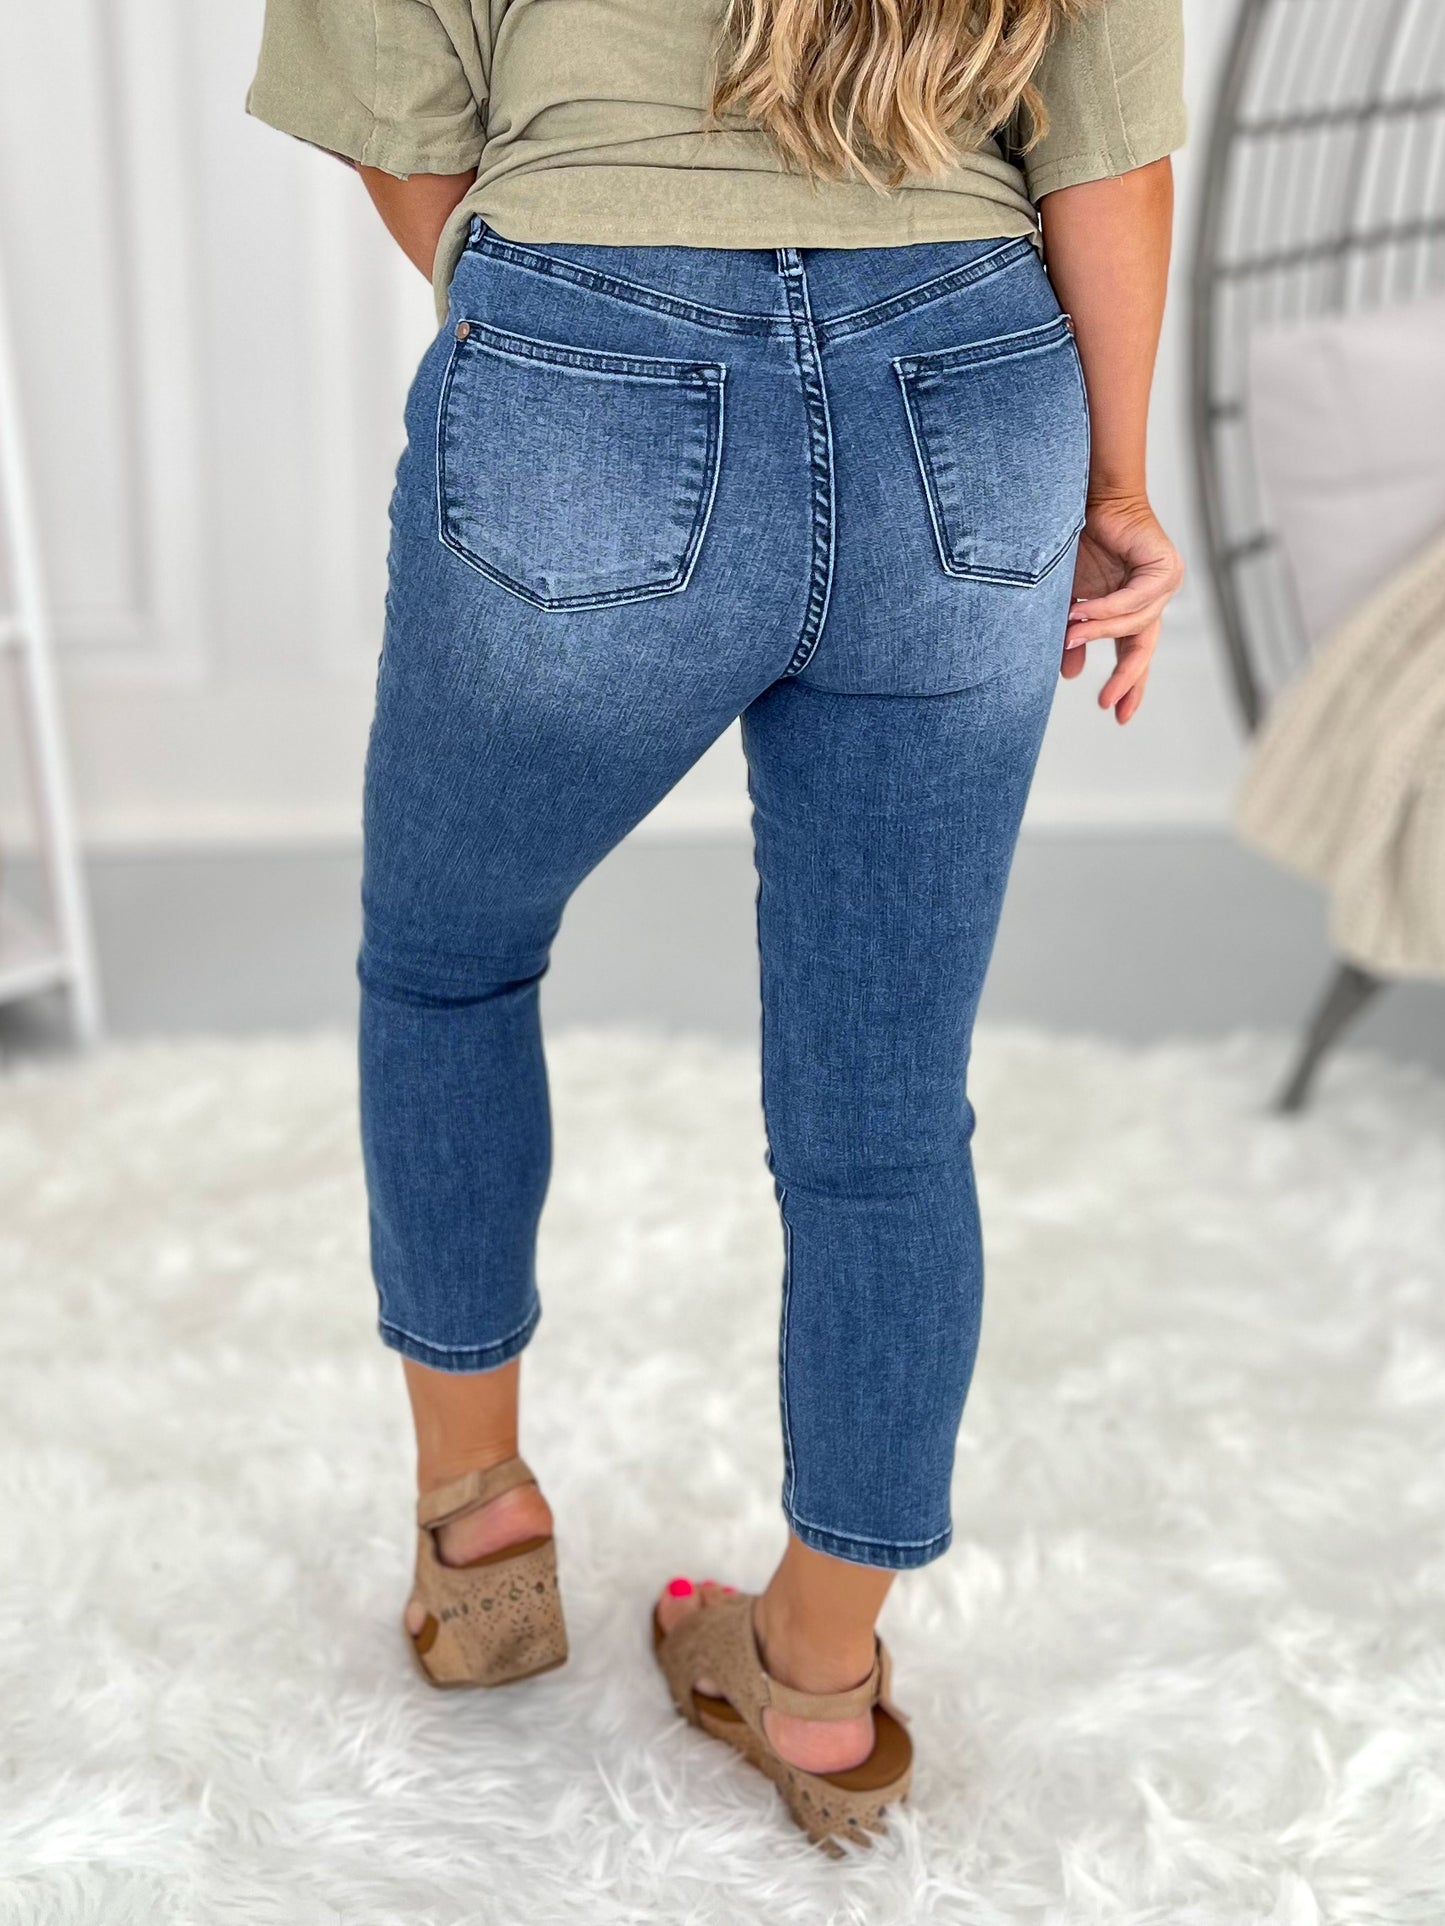 Chill Out - Judy Blue Cool Denim Pull On Capris - Final Sale